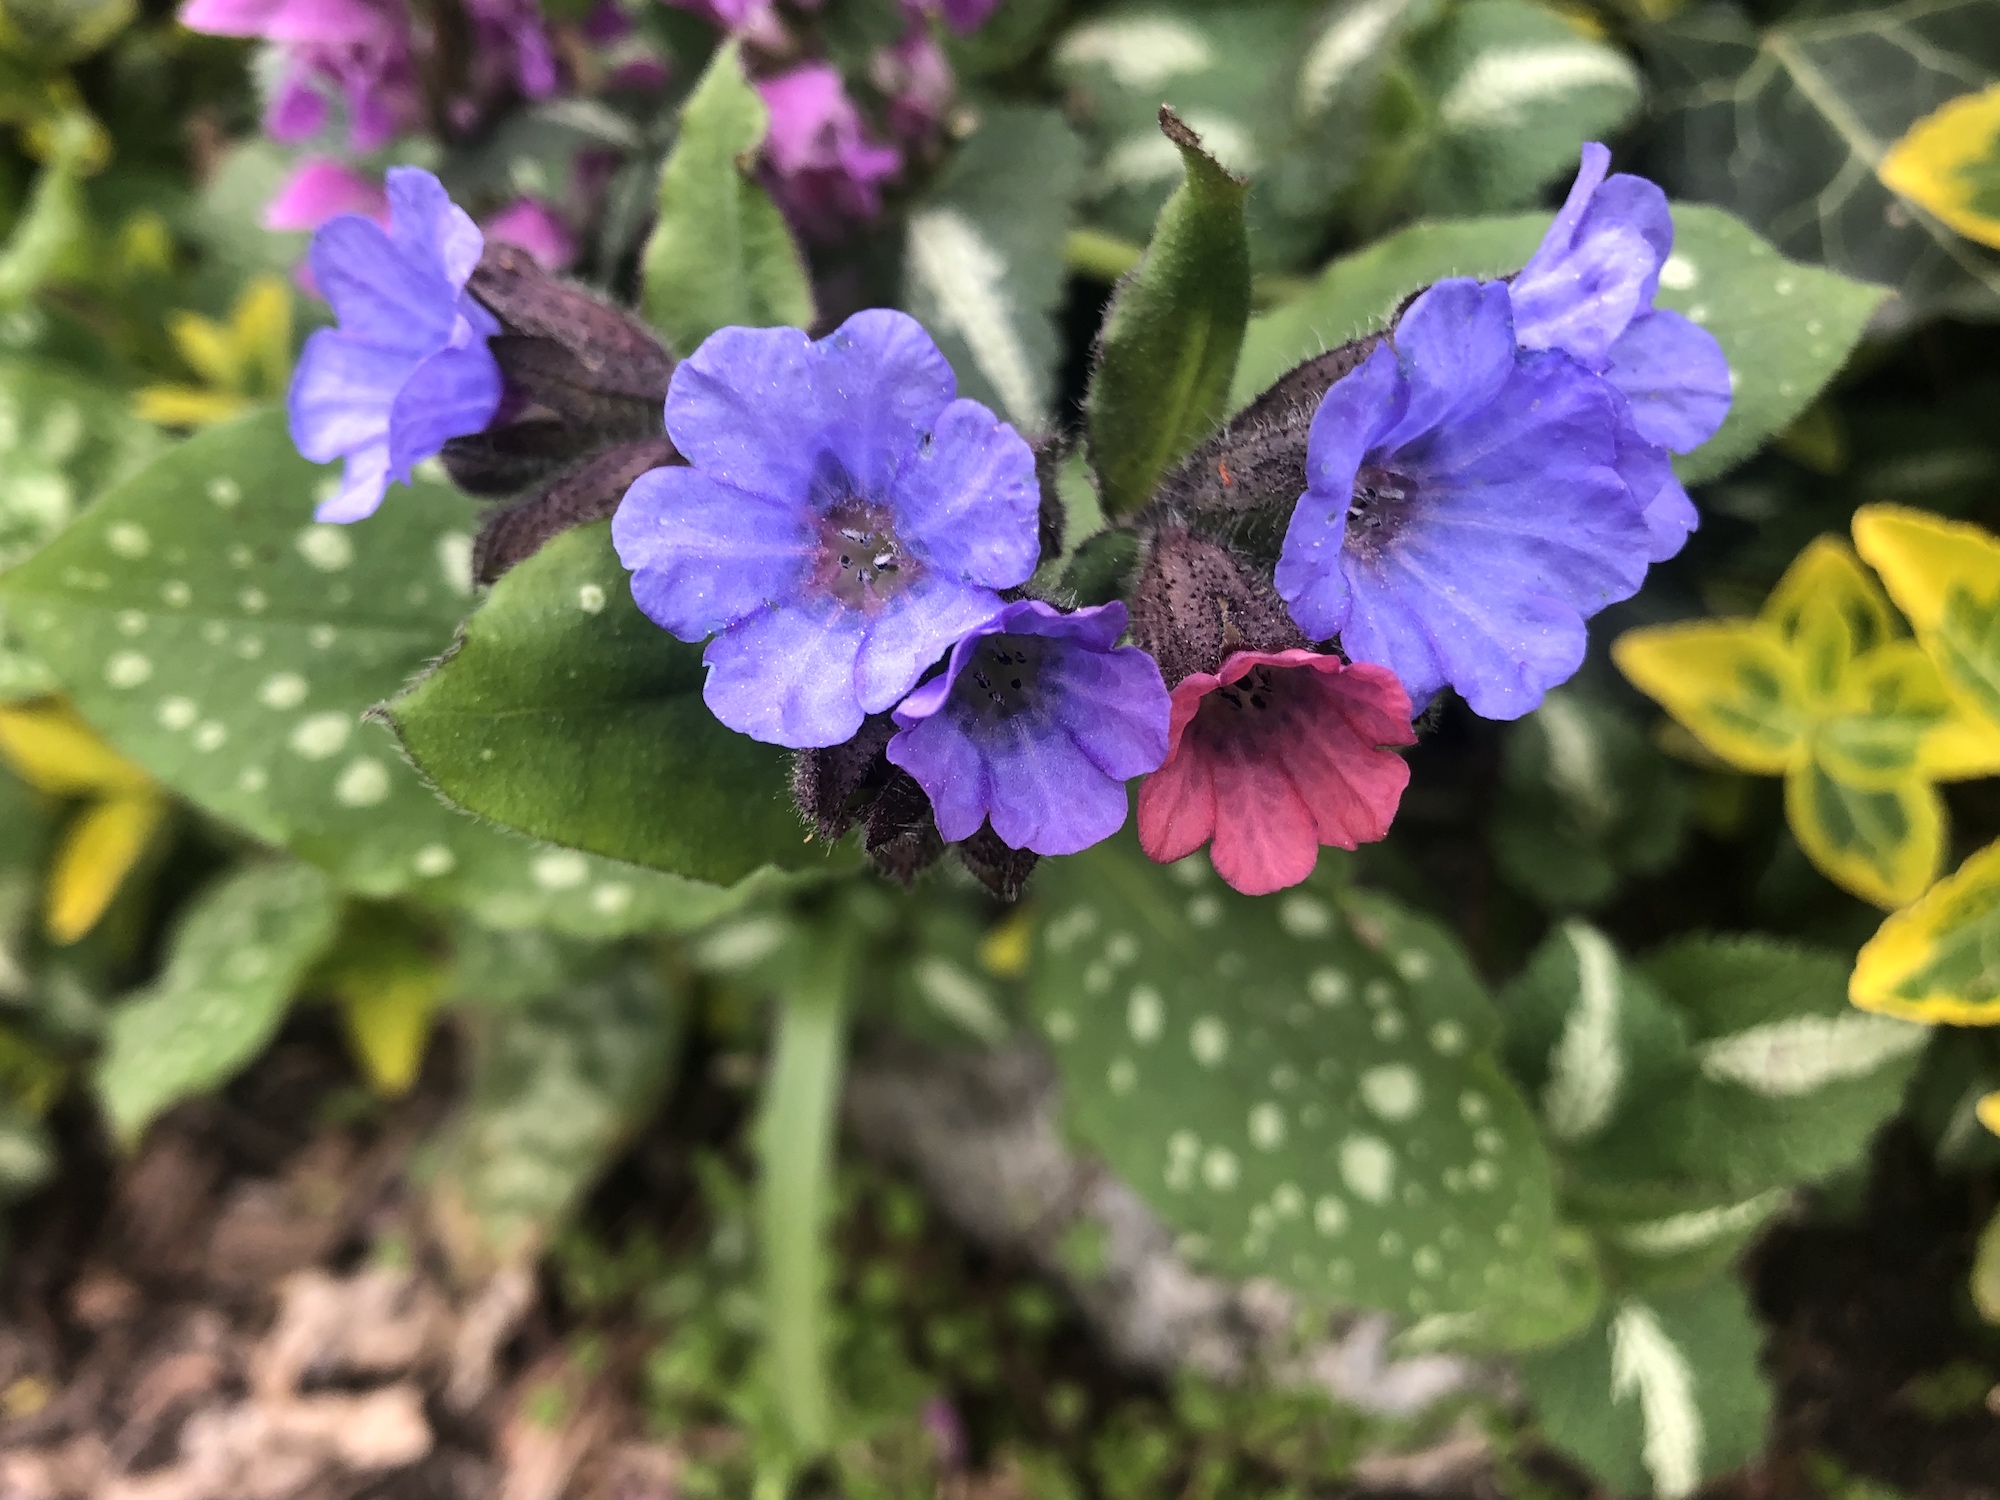 Lungwort near Agawa Path in Nakoma in Madison, Wisconsin on April 26, 2021.